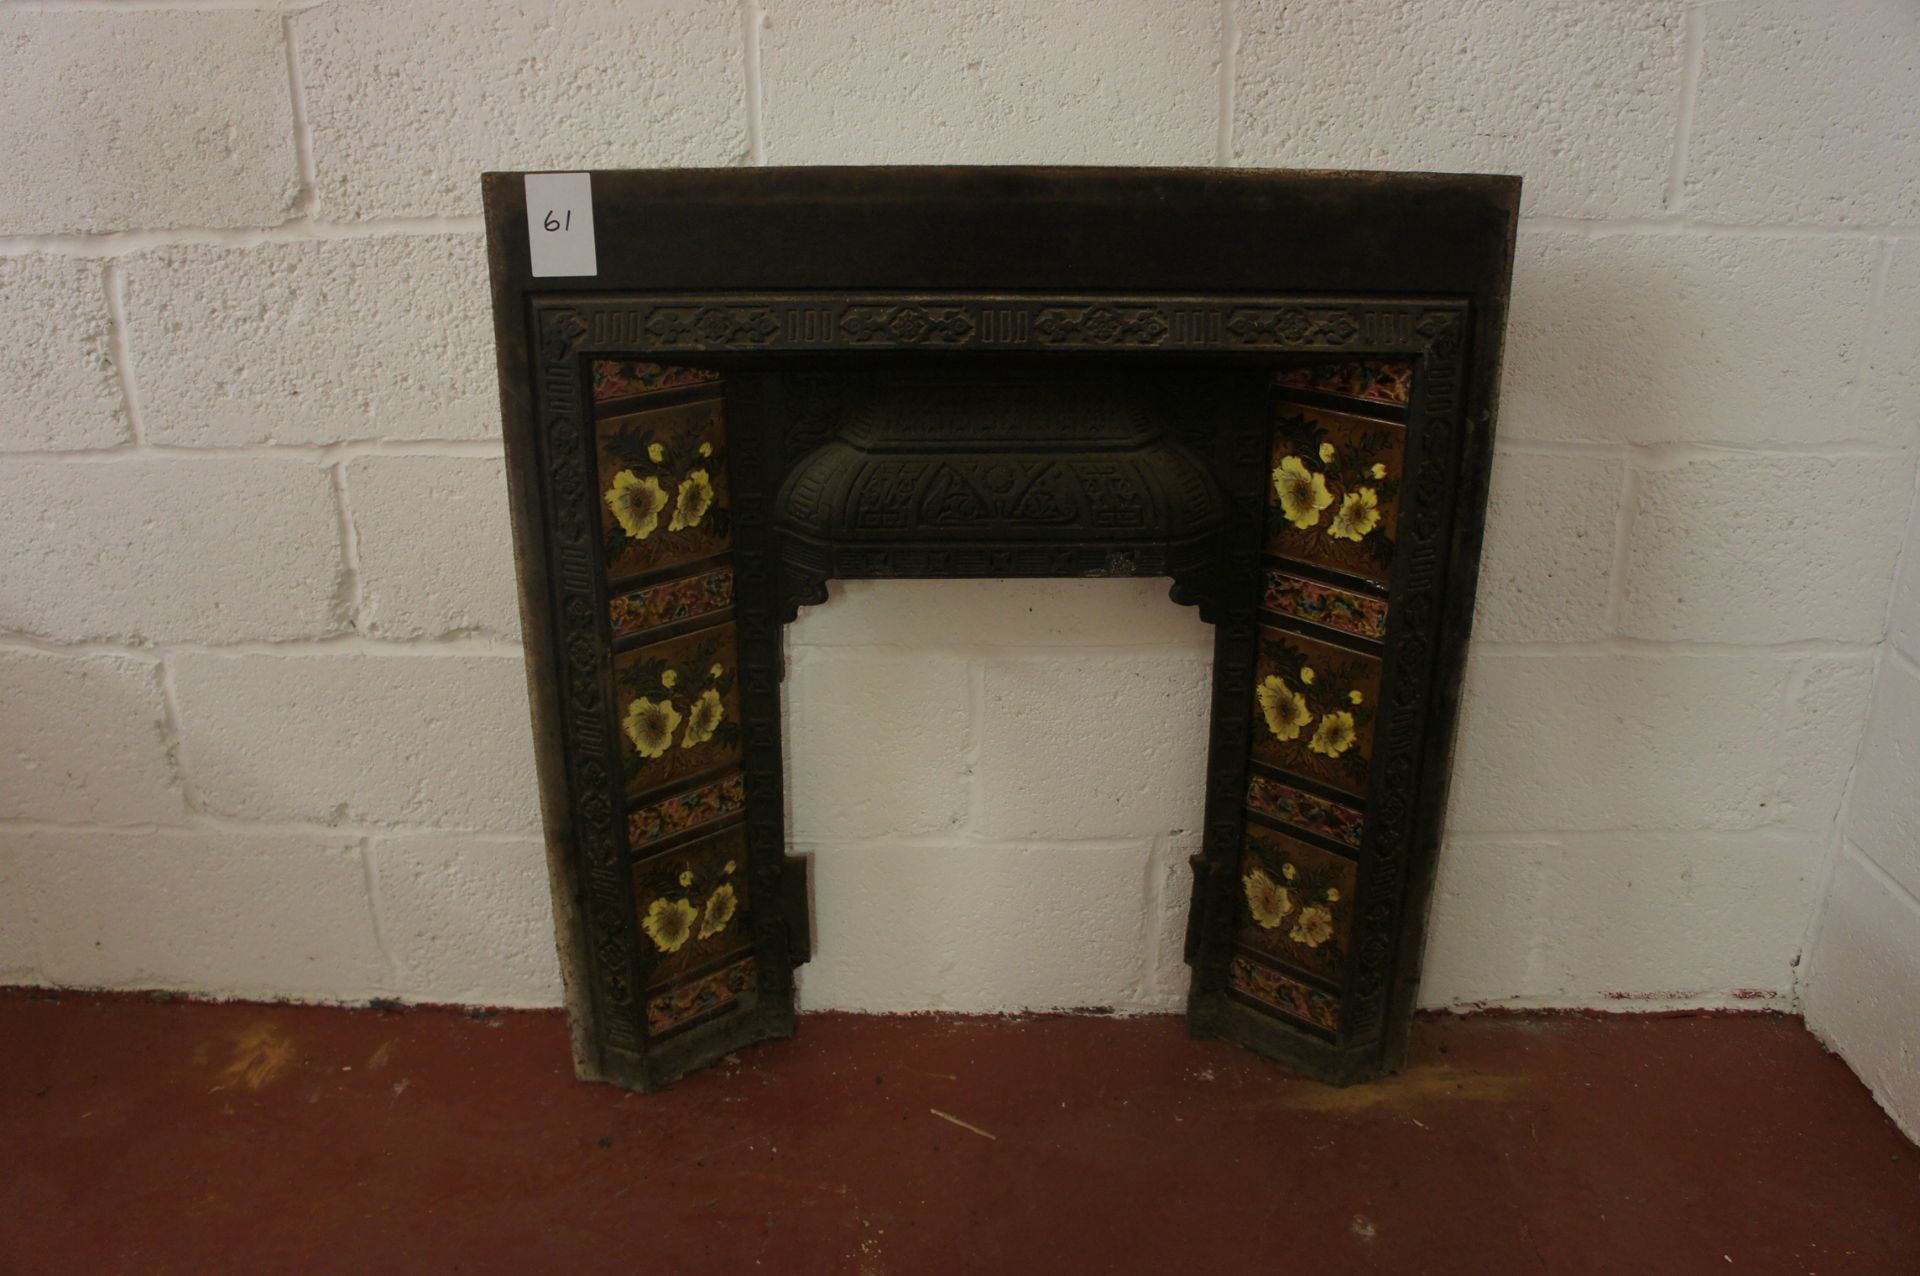 Cast iron fireplace insert with tile inserts